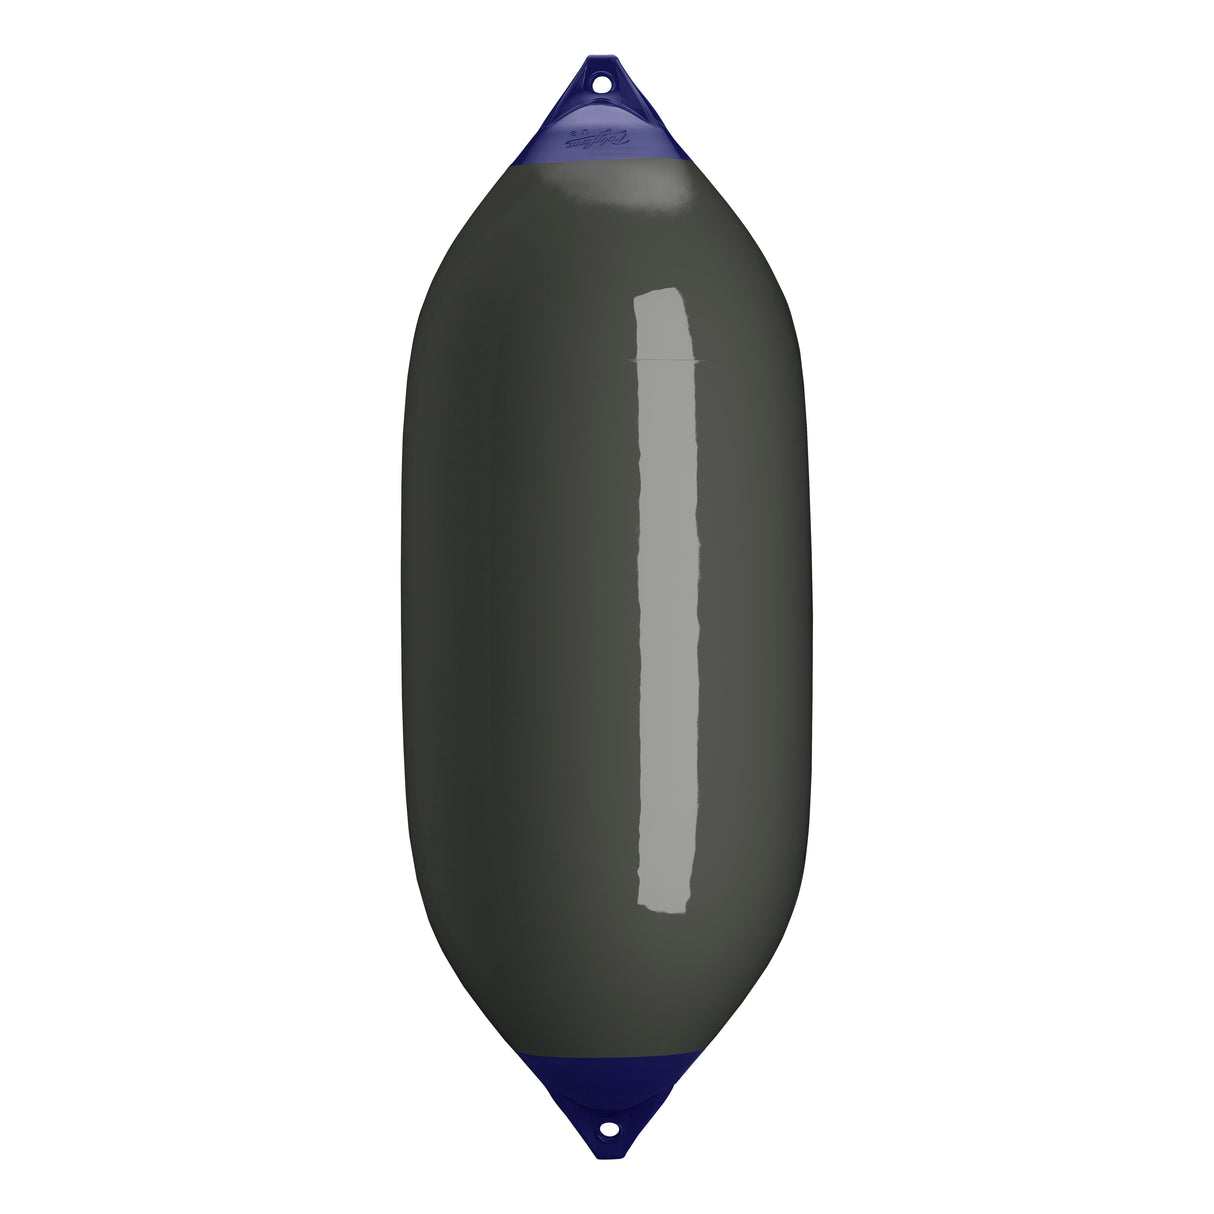 Graphite boat fender with Navy-Top, Polyform F-13 